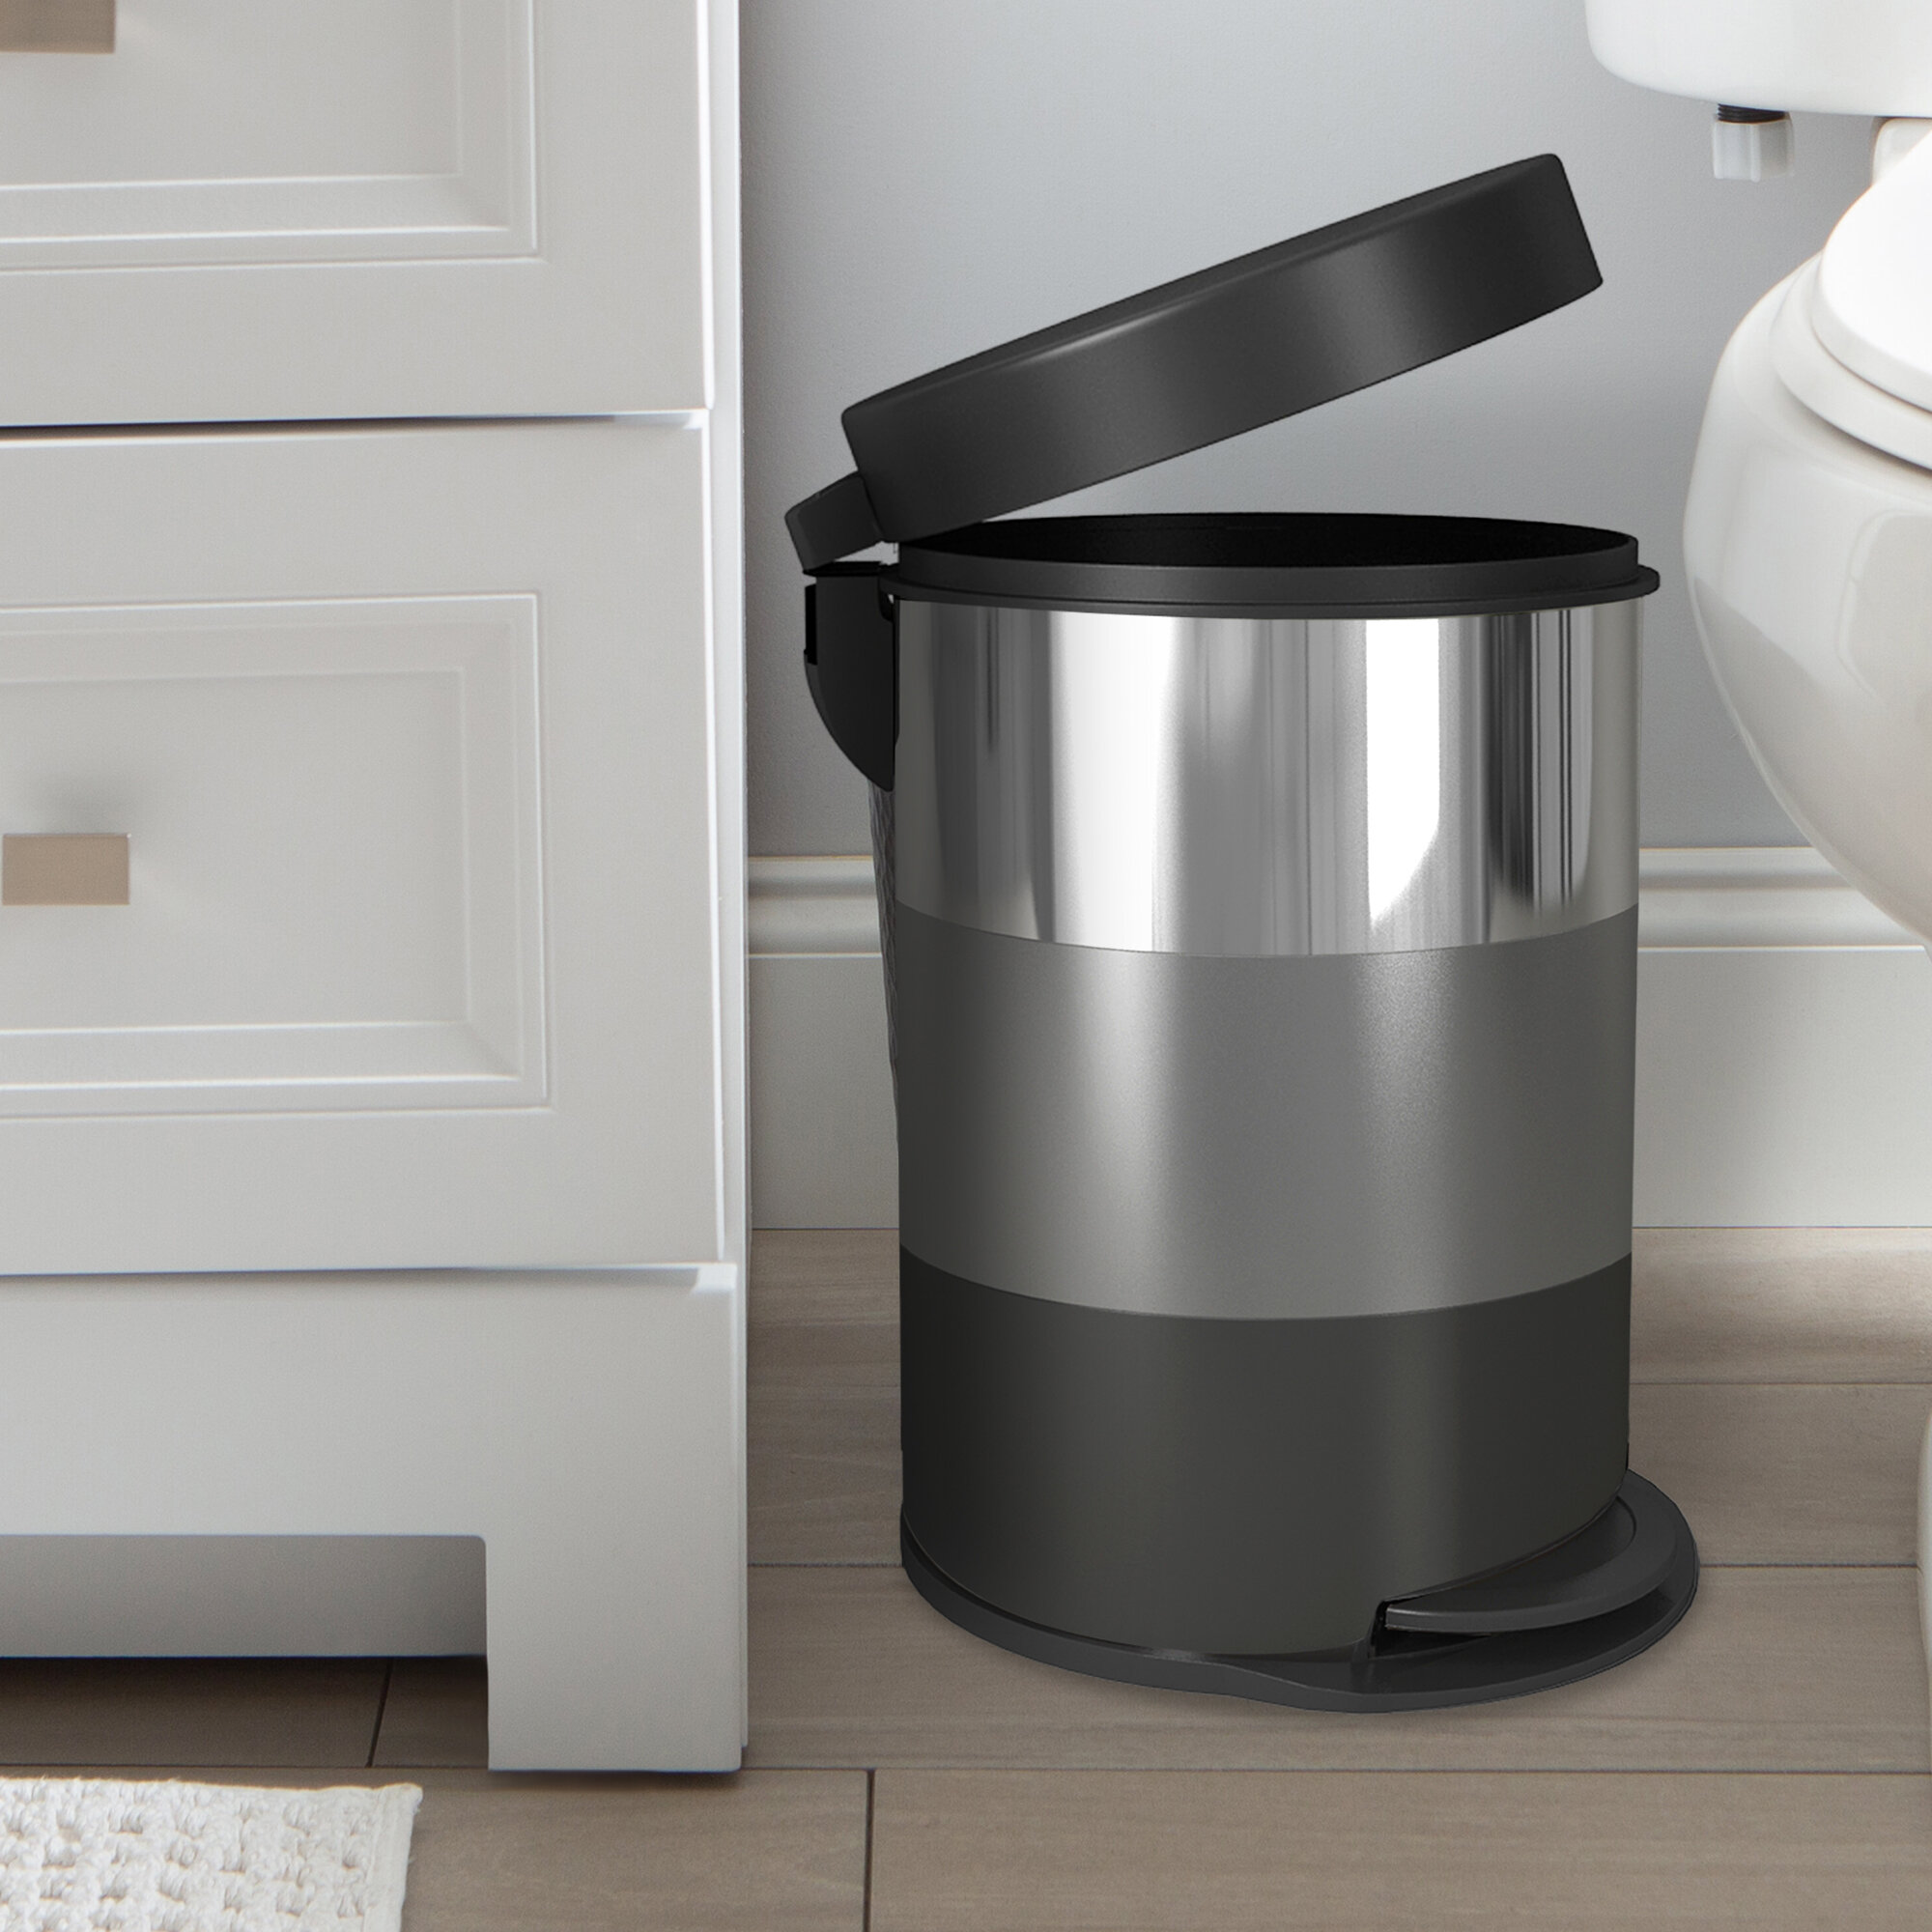 MoNiBloom 1.3 Gallon Trash Can with Step Pedal, Easy-Close Lid